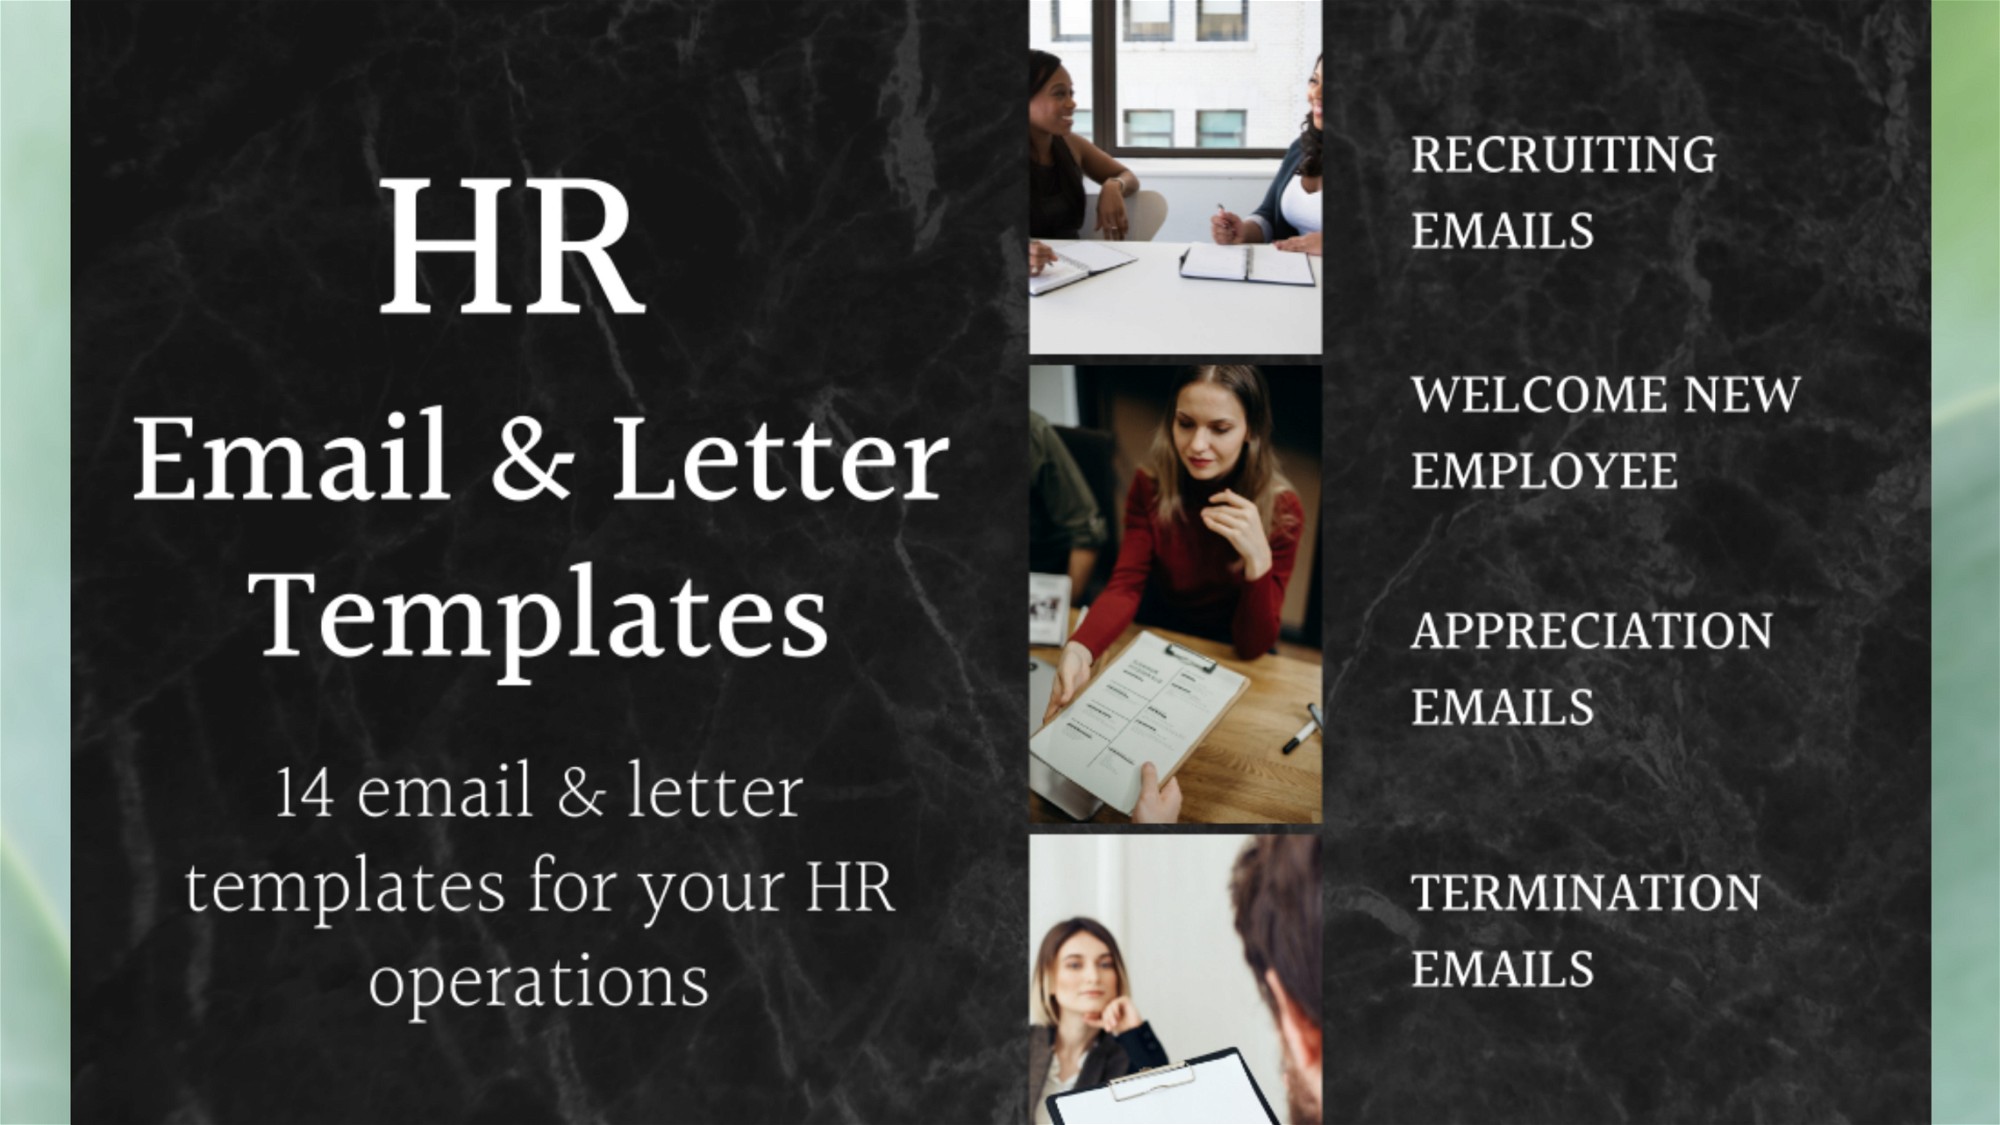 HR Email & Letter Template Kit